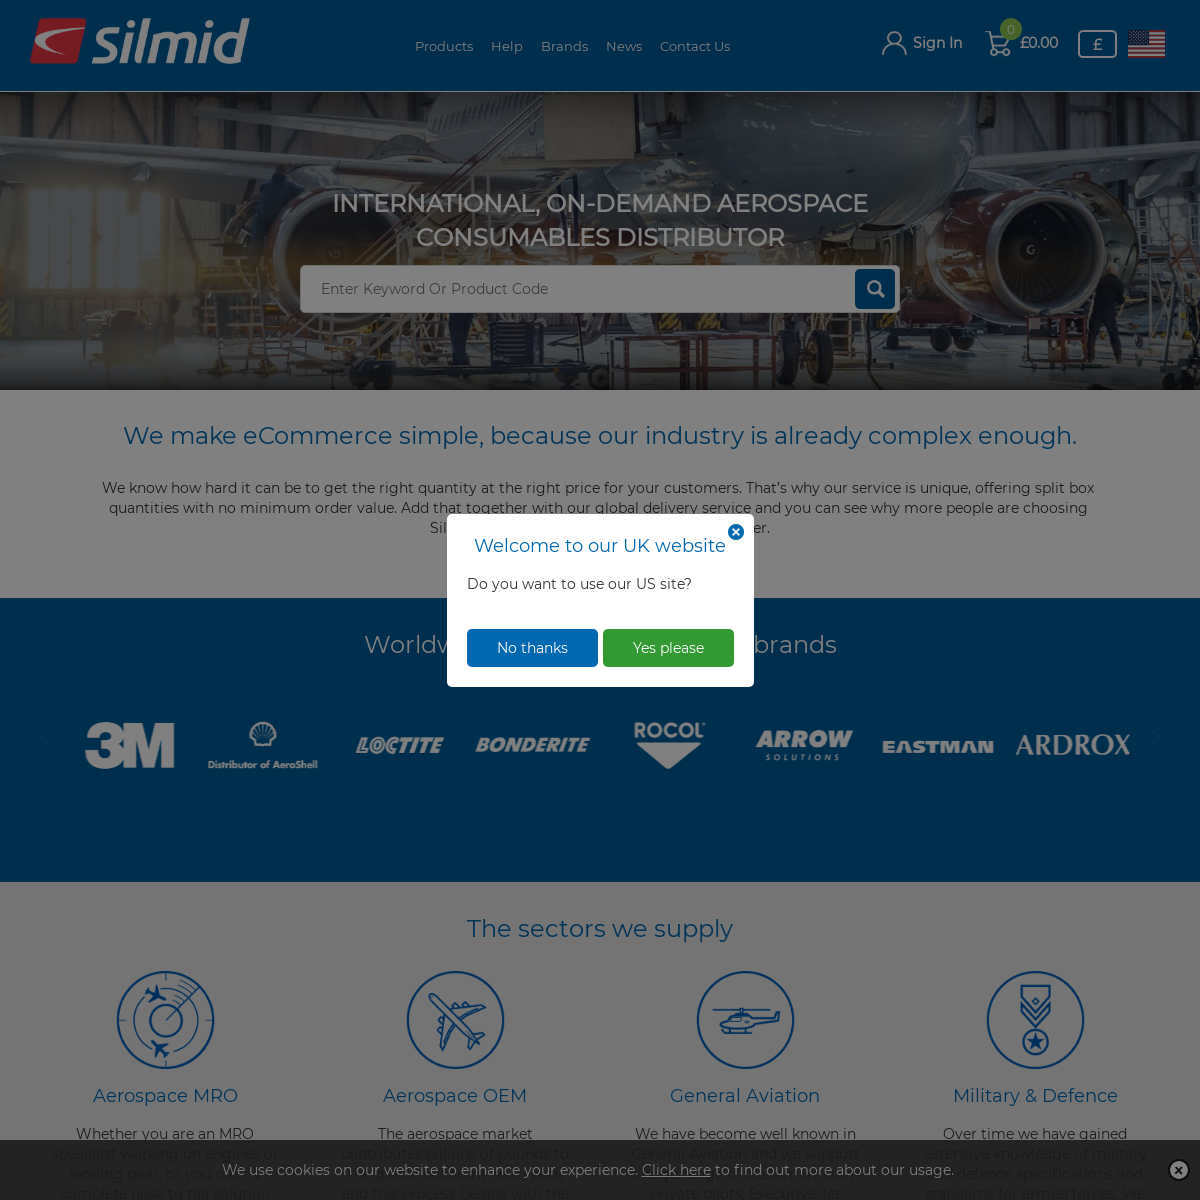 A complete backup of silmid.com